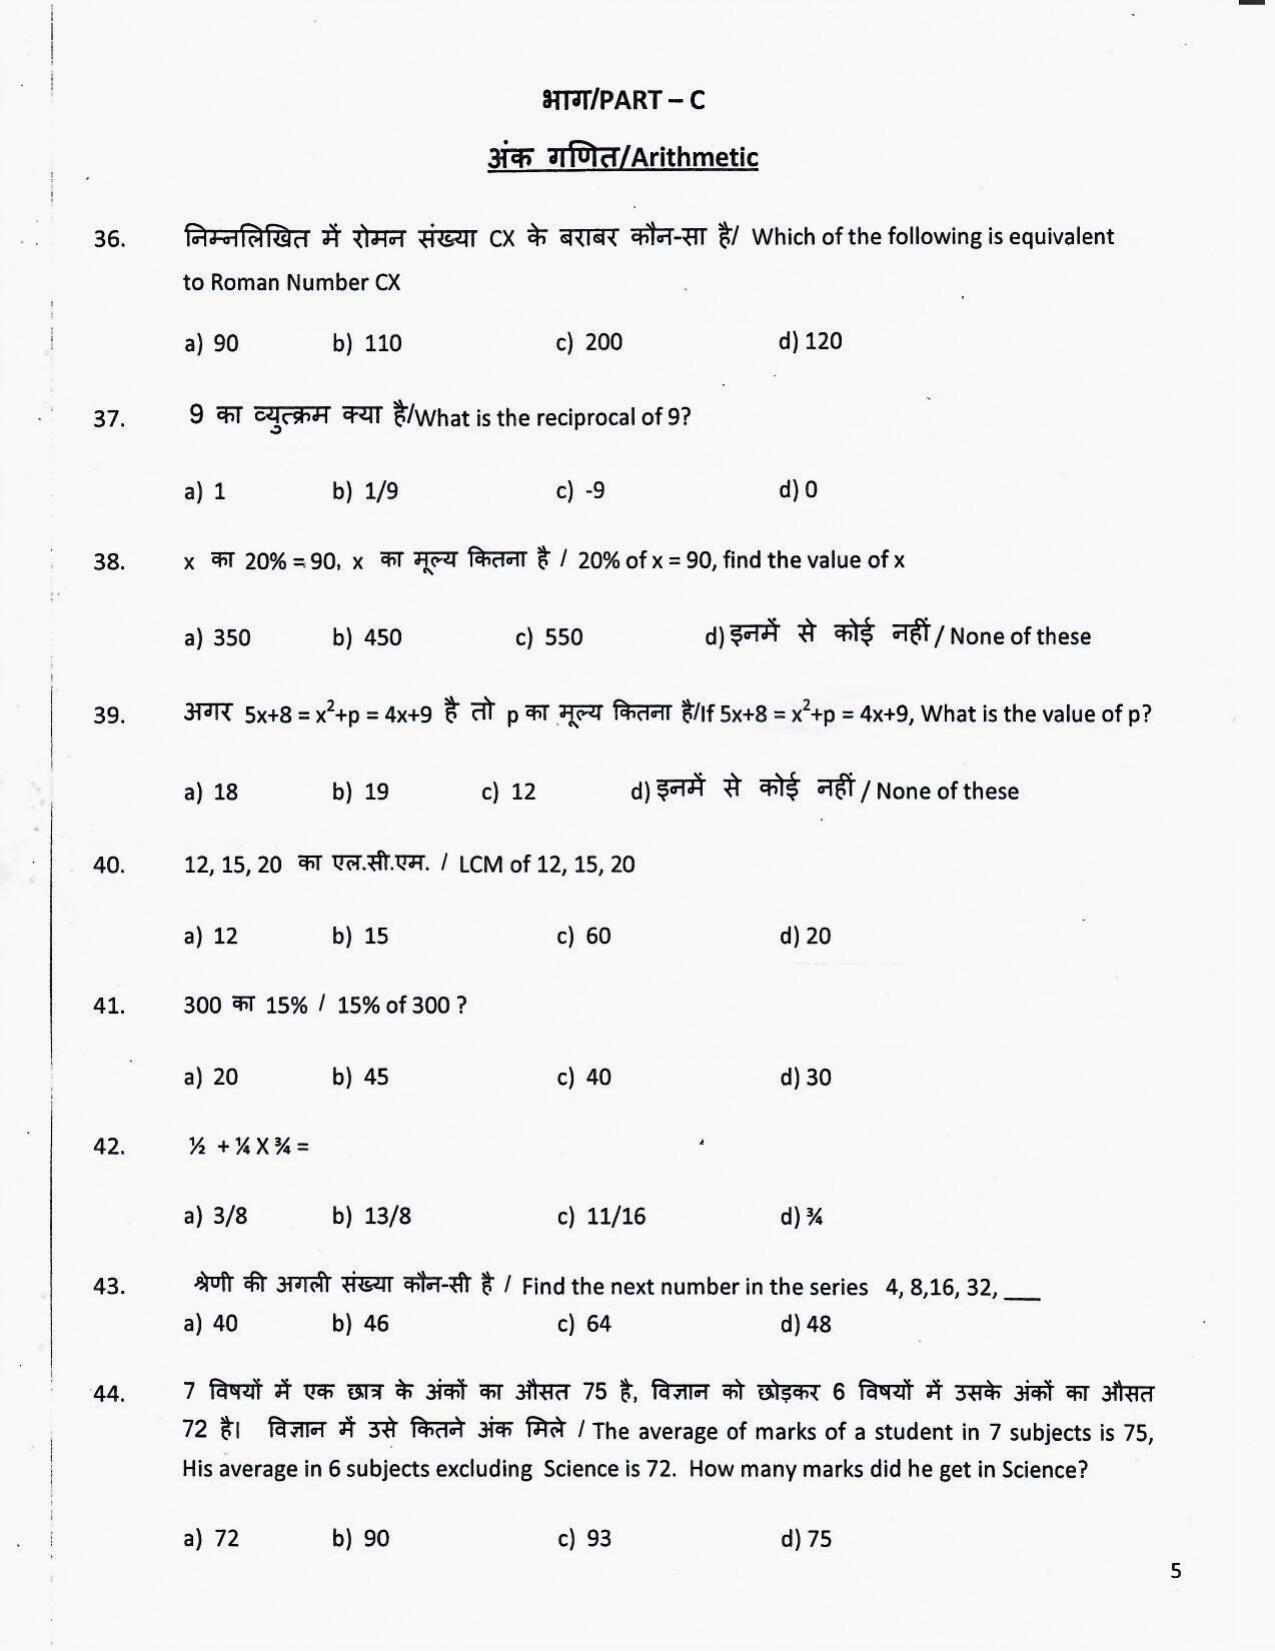 LPSC Hindi Typist 2020 Question Paper - Page 6